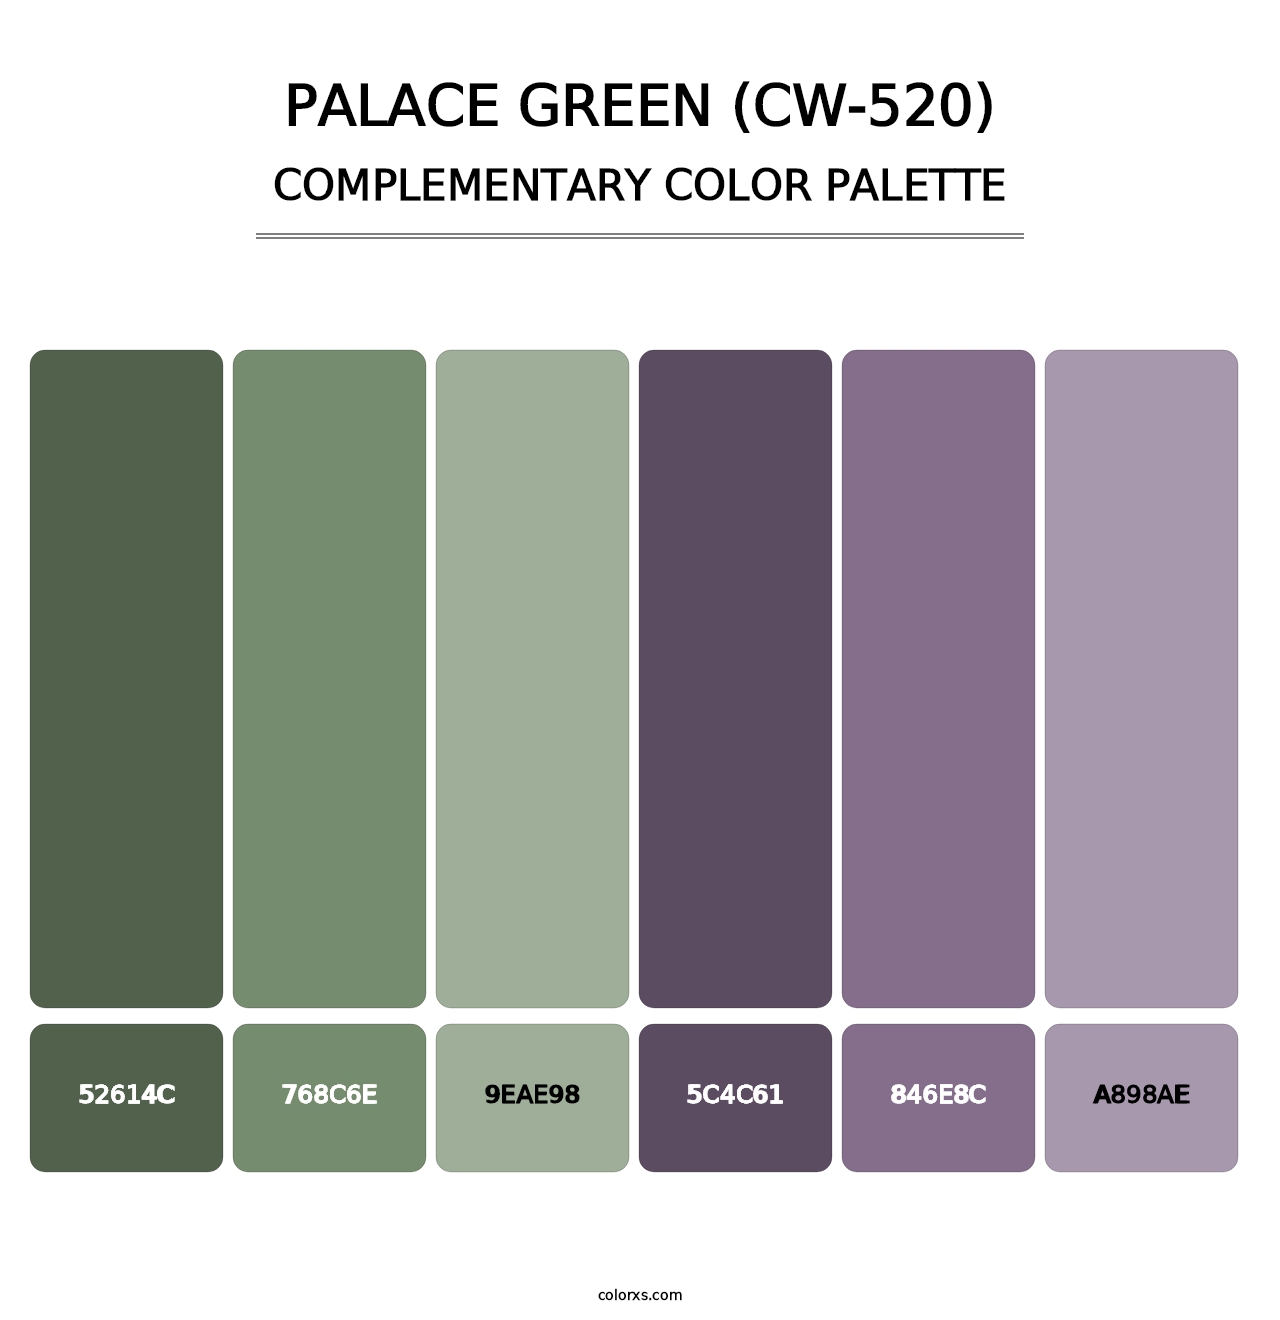 Palace Green (CW-520) - Complementary Color Palette